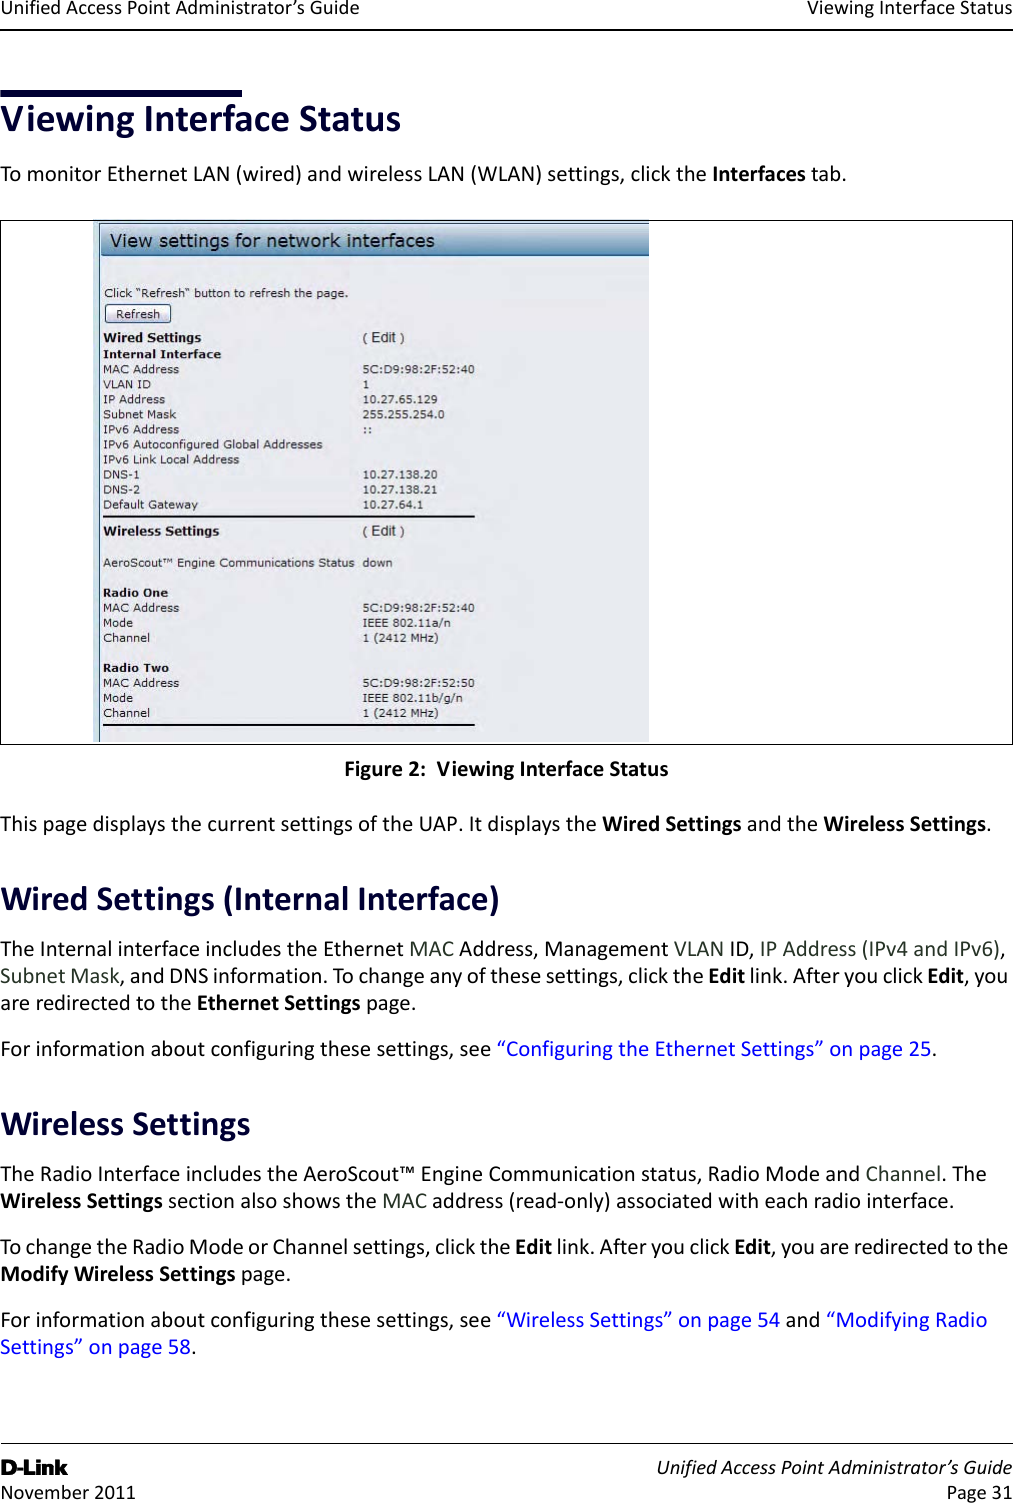 ViewingInterfaceStatusD-Link UnifiedAccessPointAdministrator’sGuide November2011 Page31UnifiedAccessPointAdministrator’sGuideViewingInterfaceStatusTomonitorEthernetLAN(wired)andwirelessLAN(WLAN)settings,clicktheInterfacestab.Figure2:ViewingInterfaceStatusThispagedisplaysthecurrentsettingsoftheUAP.ItdisplaystheWiredSettingsandtheWirelessSettings.WiredSettings(InternalInterface)TheInternalinterfaceincludestheEthernetMACAddress,ManagementVLANID,IPAddress(IPv4andIPv6),SubnetMask,andDNSinformation.Tochangeanyofthesesettings,clicktheEditlink.AfteryouclickEdit,youareredirectedtotheEthernetSettingspage.Forinformationaboutconfiguringthesesettings,see“ConfiguringtheEthernetSettings”onpage25.WirelessSettingsTheRadioInterfaceincludestheAeroScout™EngineCommunicationstatus,RadioModeandChannel.TheWirelessSettingssectionalsoshowstheMACaddress(read‐only)associatedwitheachradiointerface.TochangetheRadioModeorChannelsettings,clicktheEditlink.AfteryouclickEdit,youareredirectedtotheModifyWirelessSettingspage.Forinformationaboutconfiguringthesesettings,see“WirelessSettings”onpage54and“ModifyingRadioSettings”onpage58.